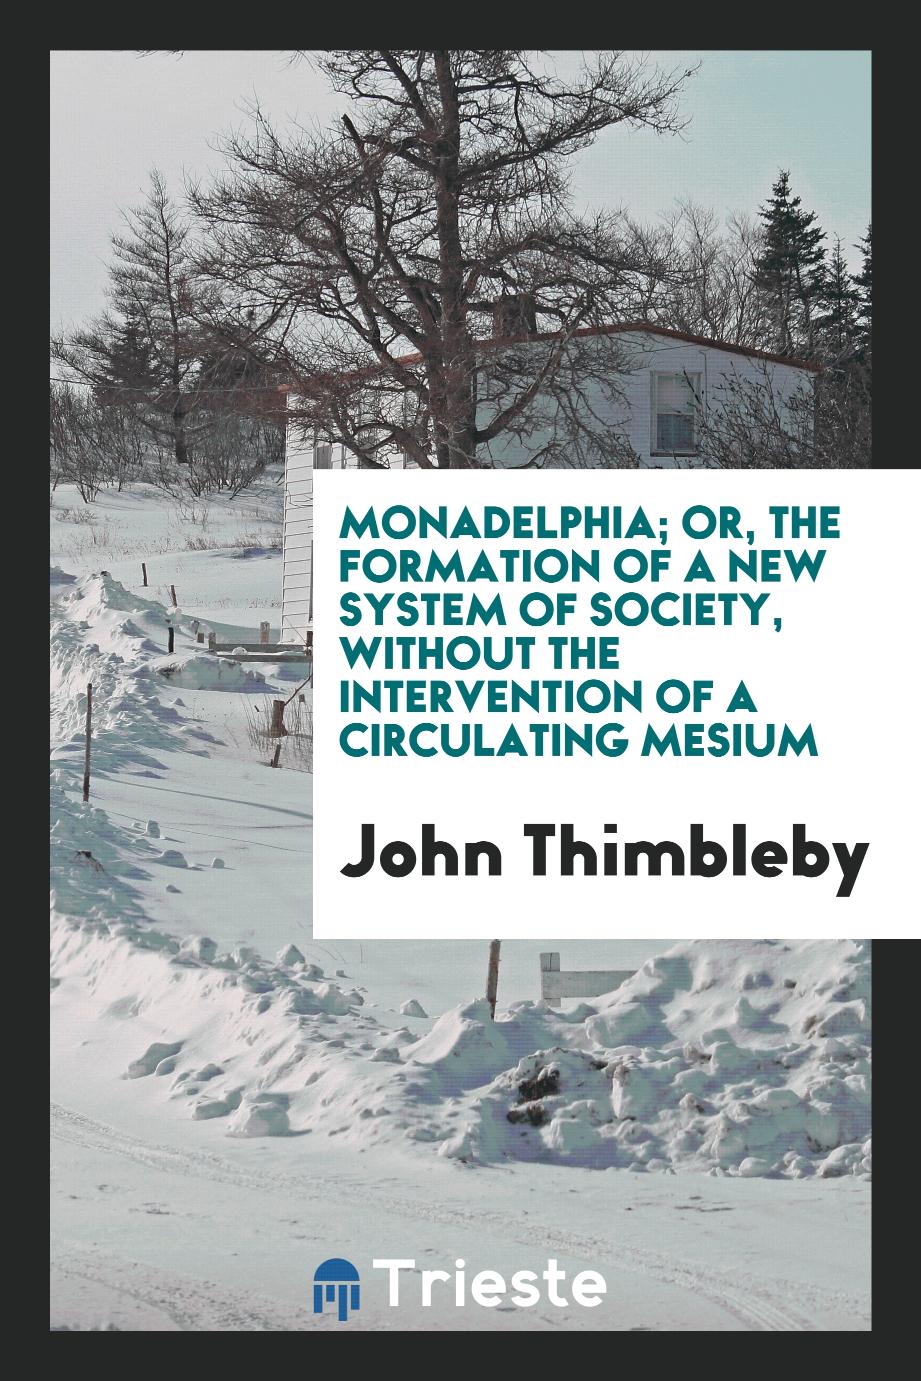 Monadelphia; or, The formation of a new system of society, without the intervention of a Circulating Mesium